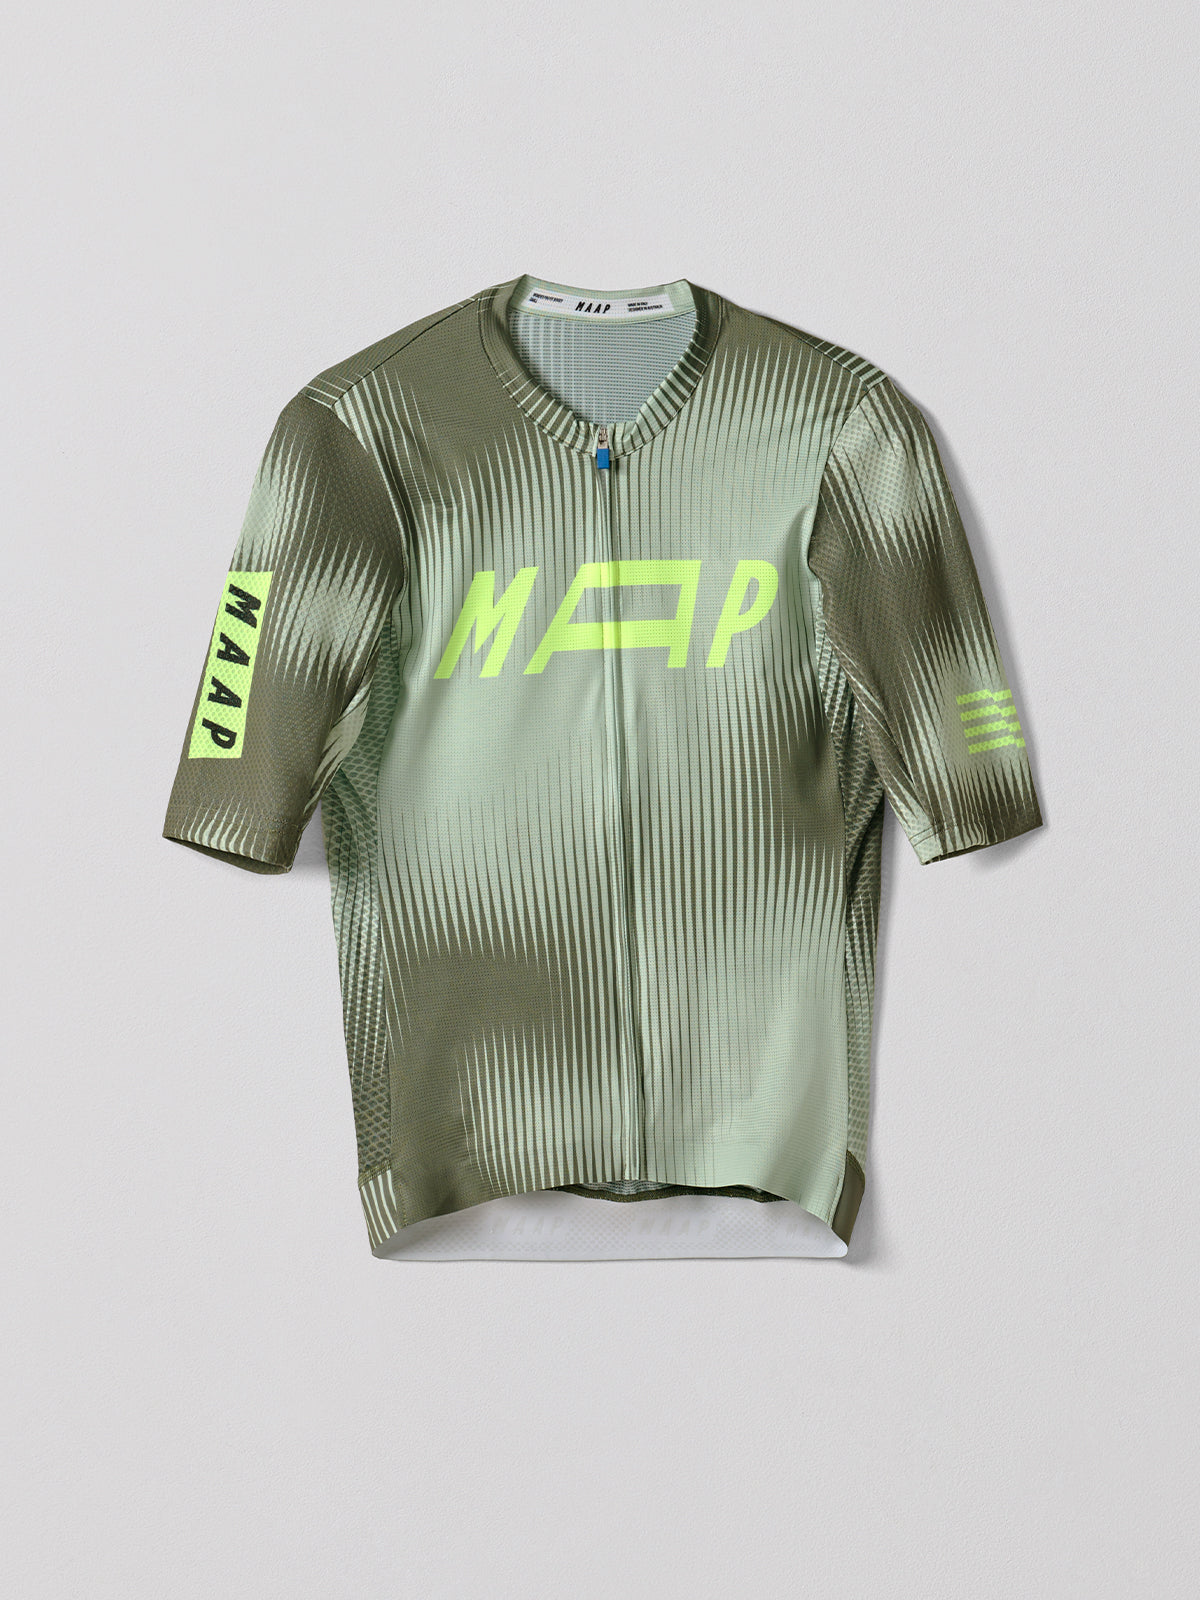 Women's Privateer I.S Pro Jersey